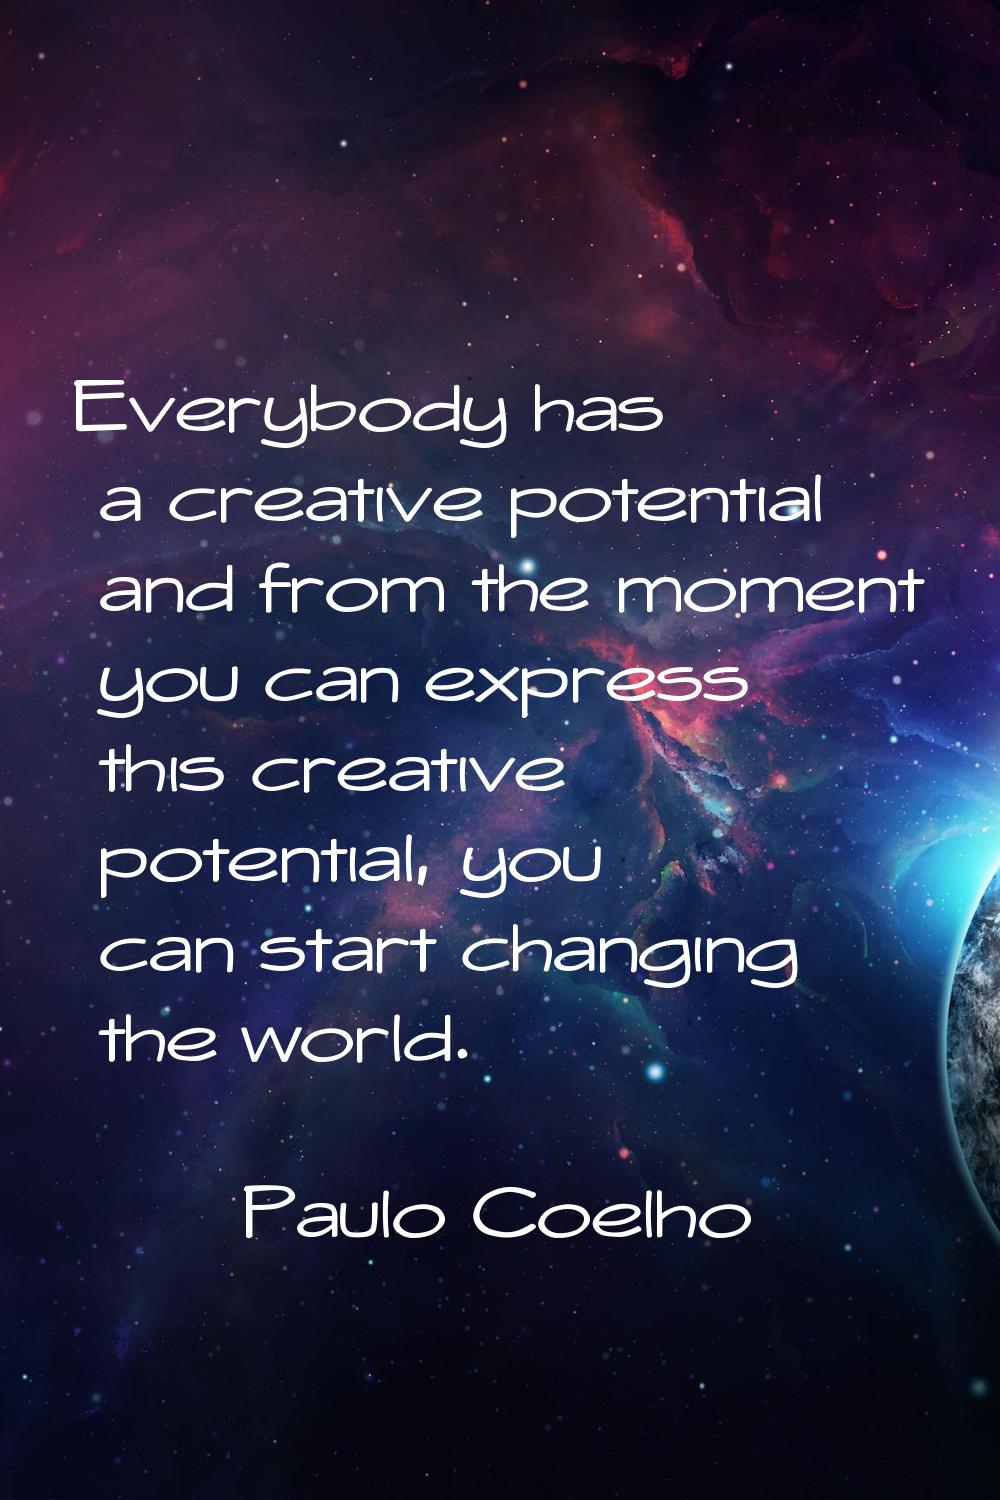 Everybody has a creative potential and from the moment you can express this creative potential, you